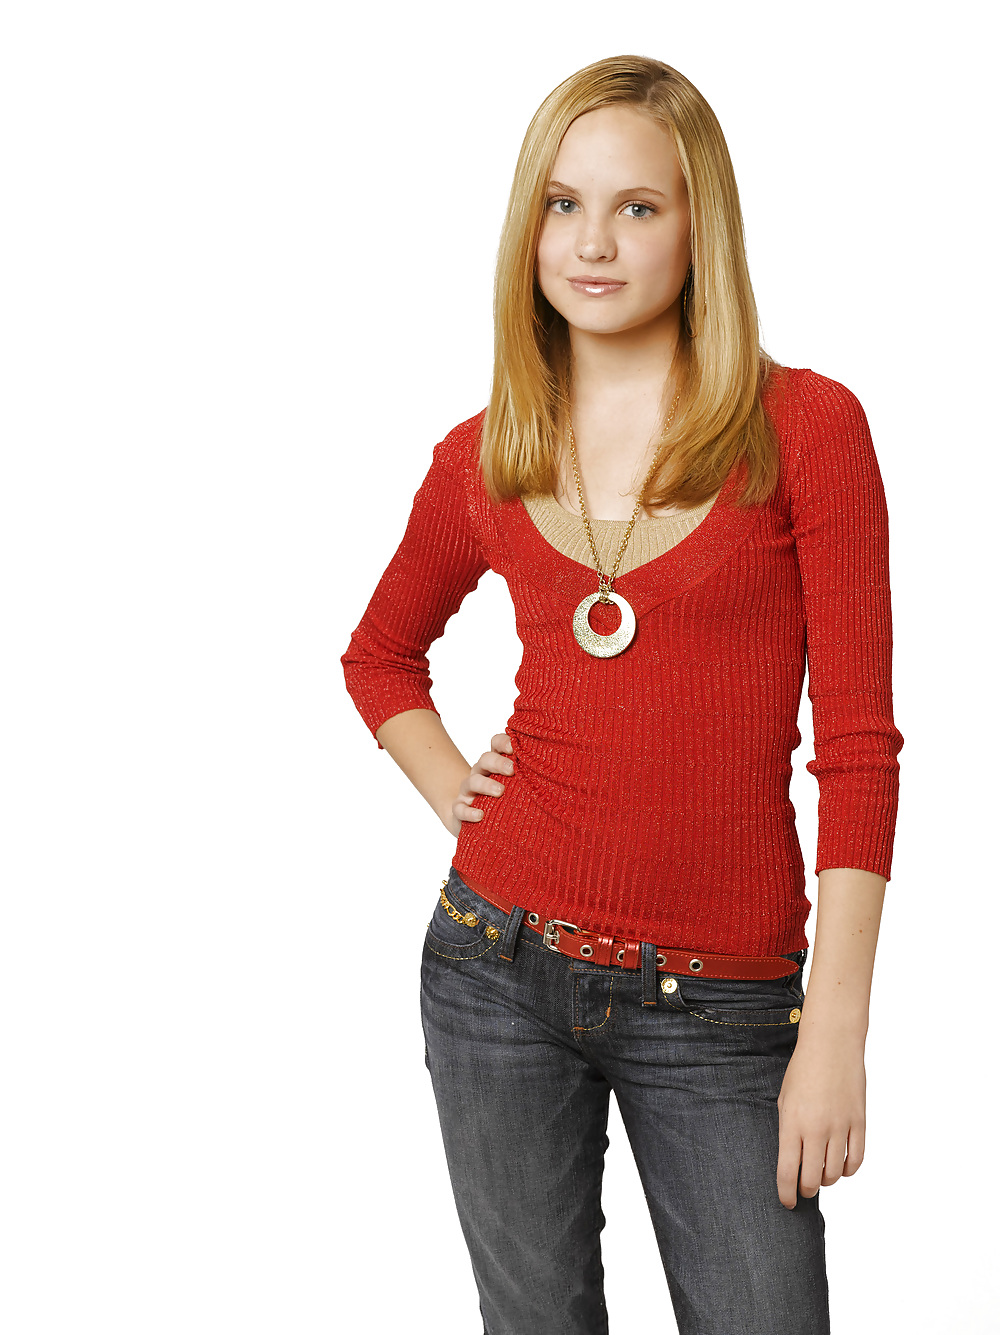 Meaghan Martin Jette #17298626